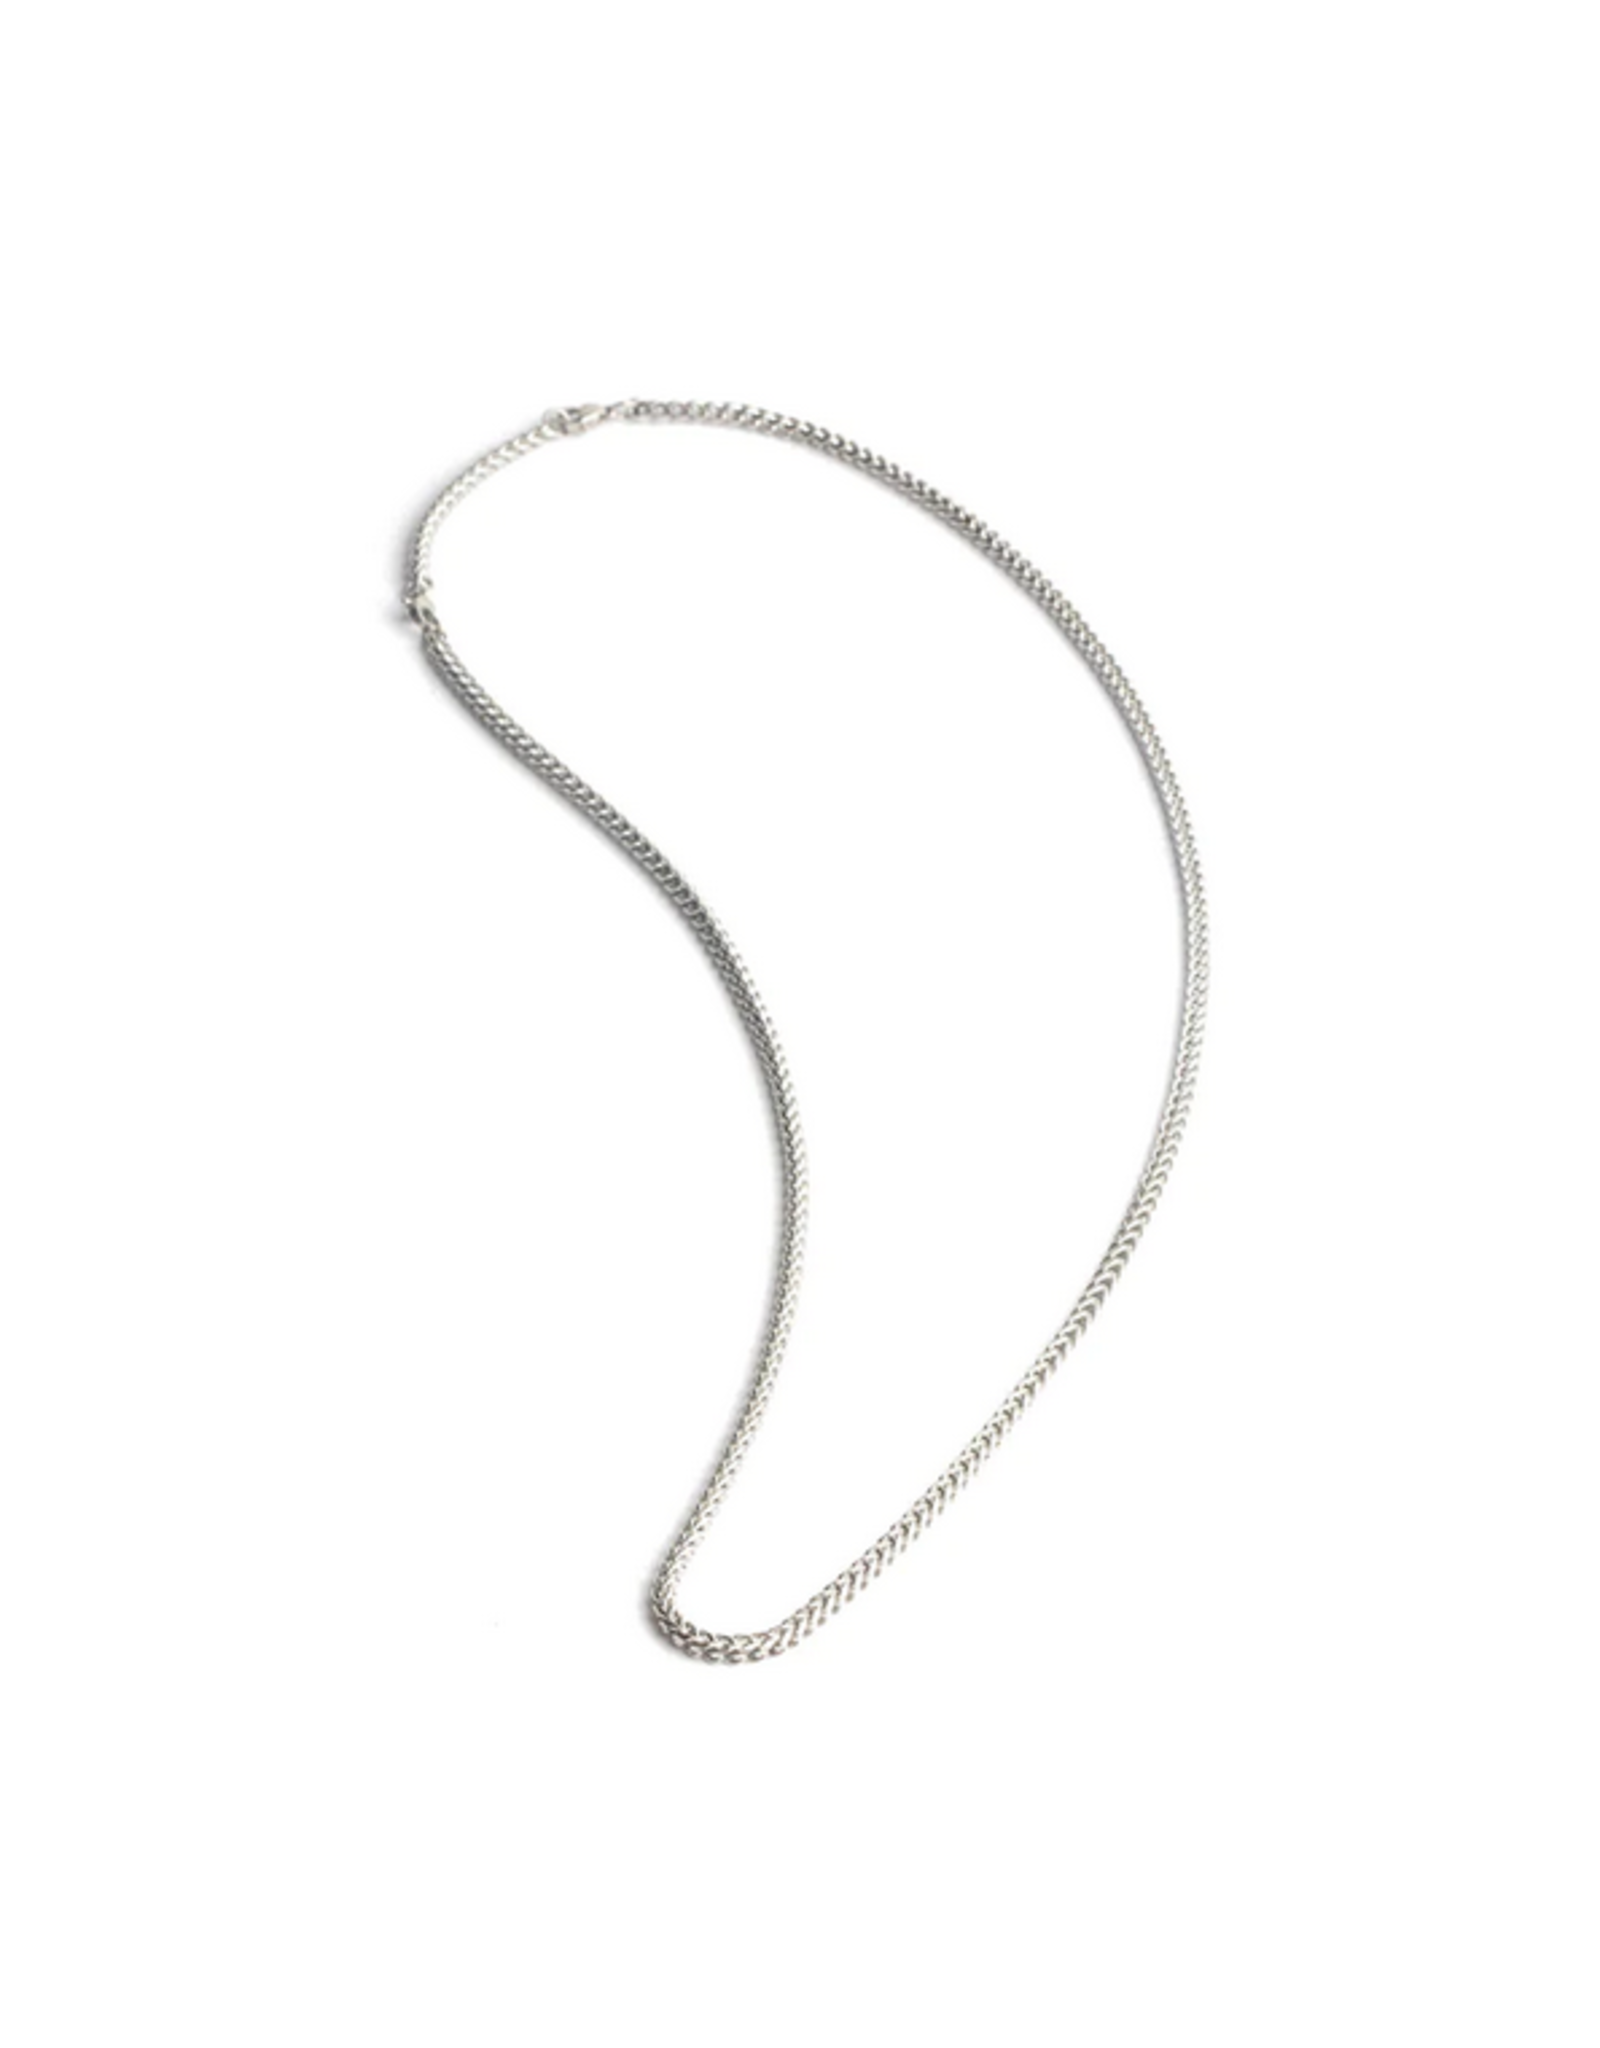 gemini-3mm-stainless-steel-foxtail-necklace-with-silver-plated-finish